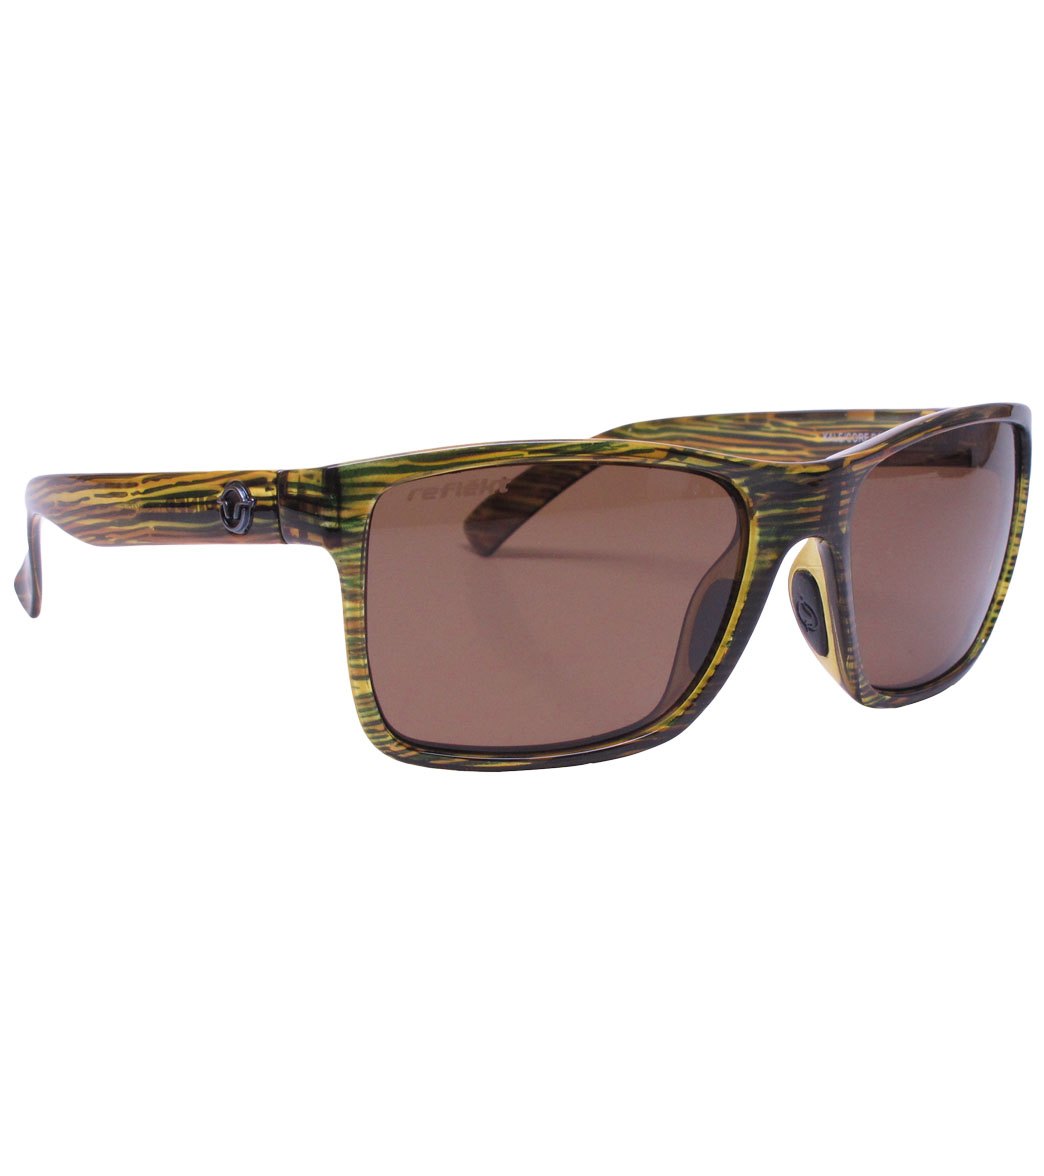 Unsinkable Polarized Mariner Floating Sunglasses - Kale/Brown - Swimoutlet.com